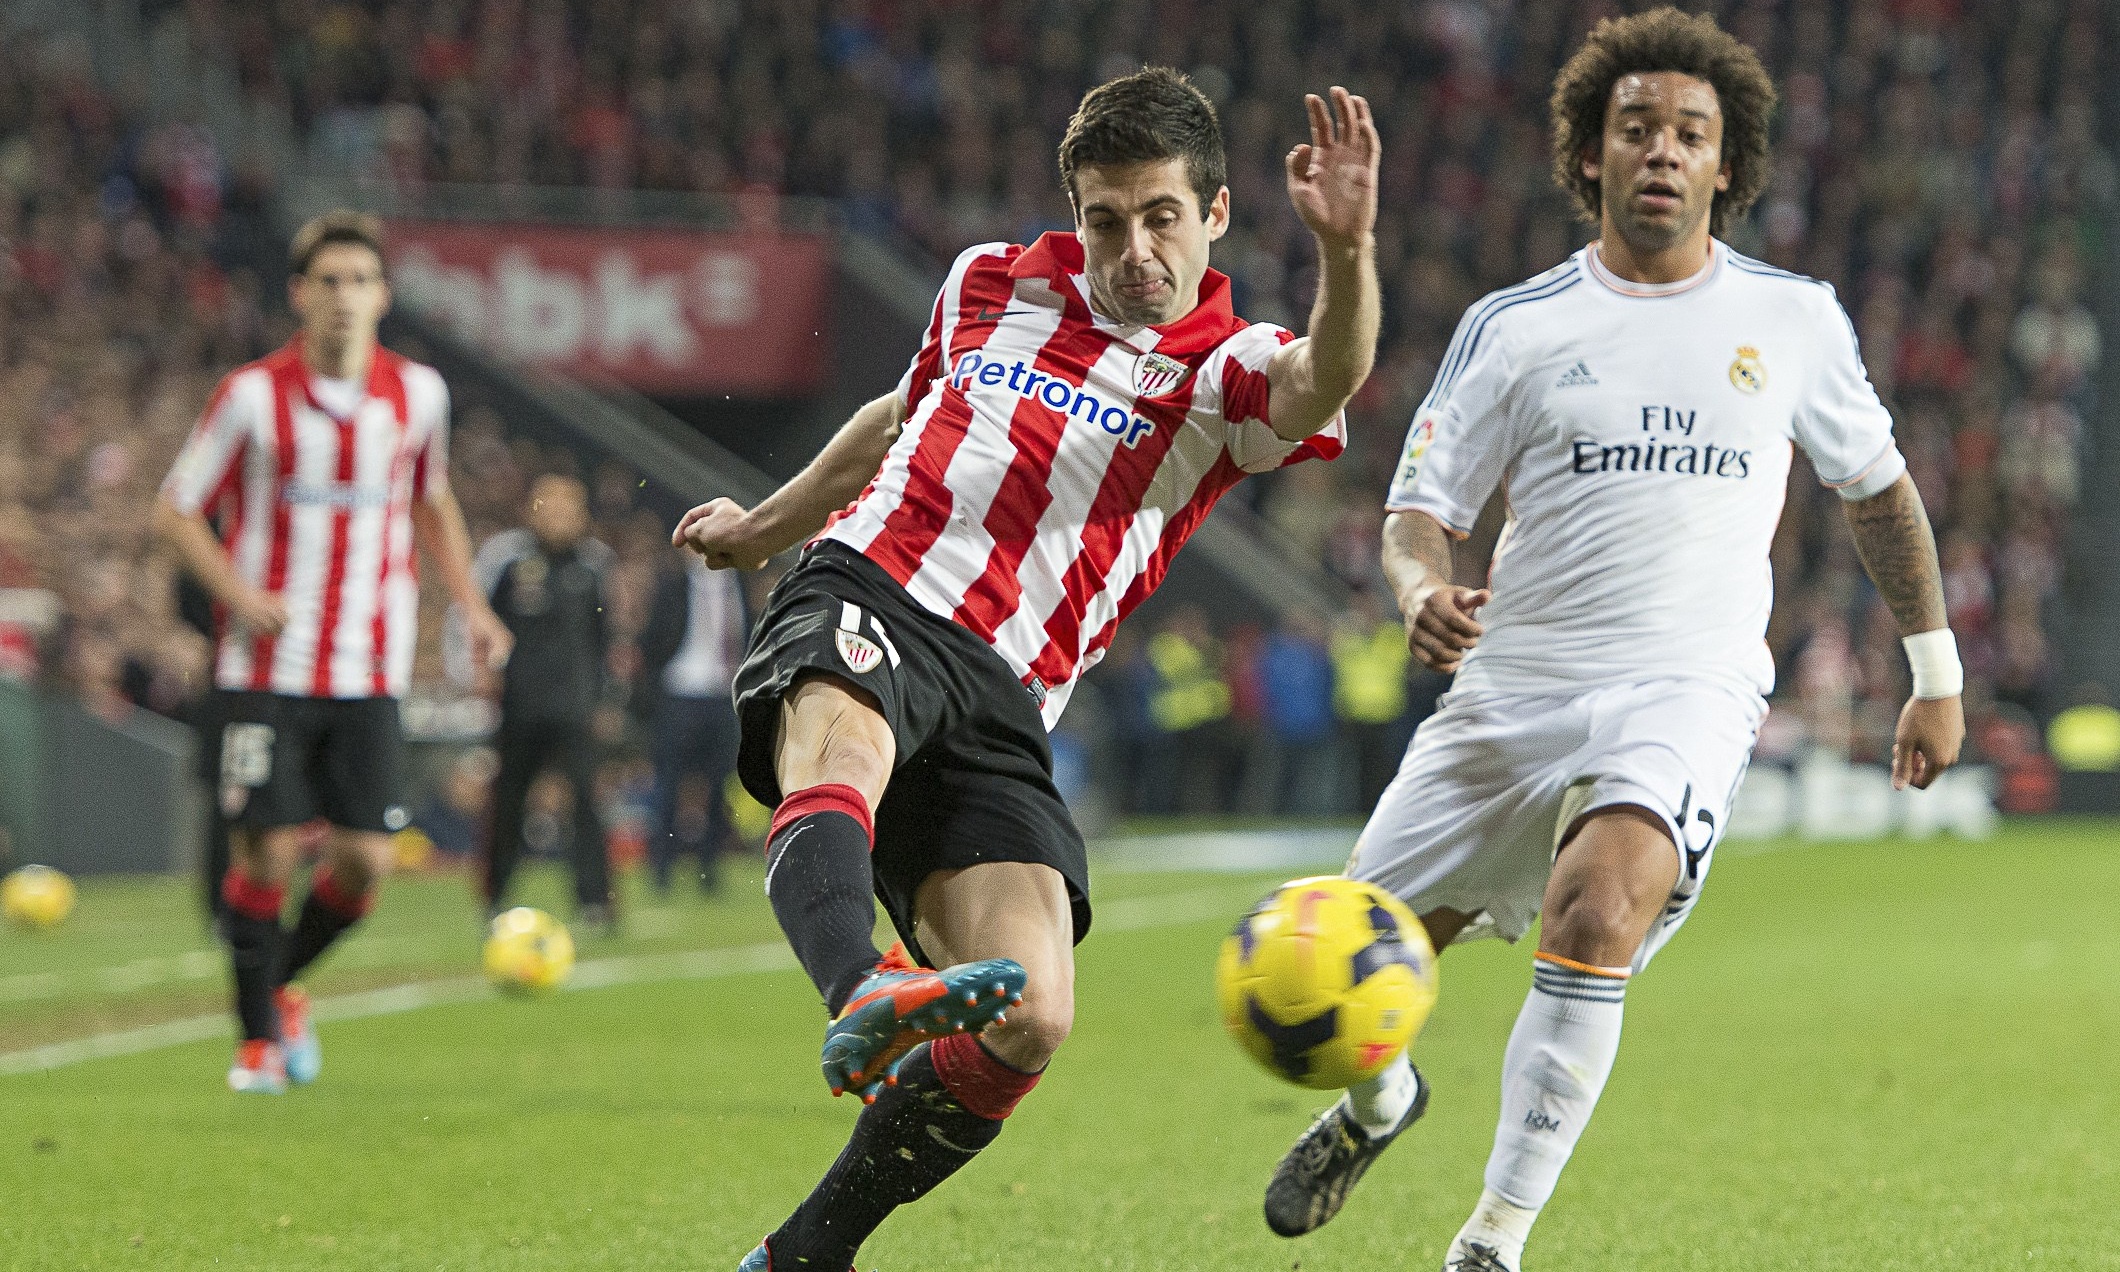 Match Real Madrid vs Athletic Bilbao en direct live streaming